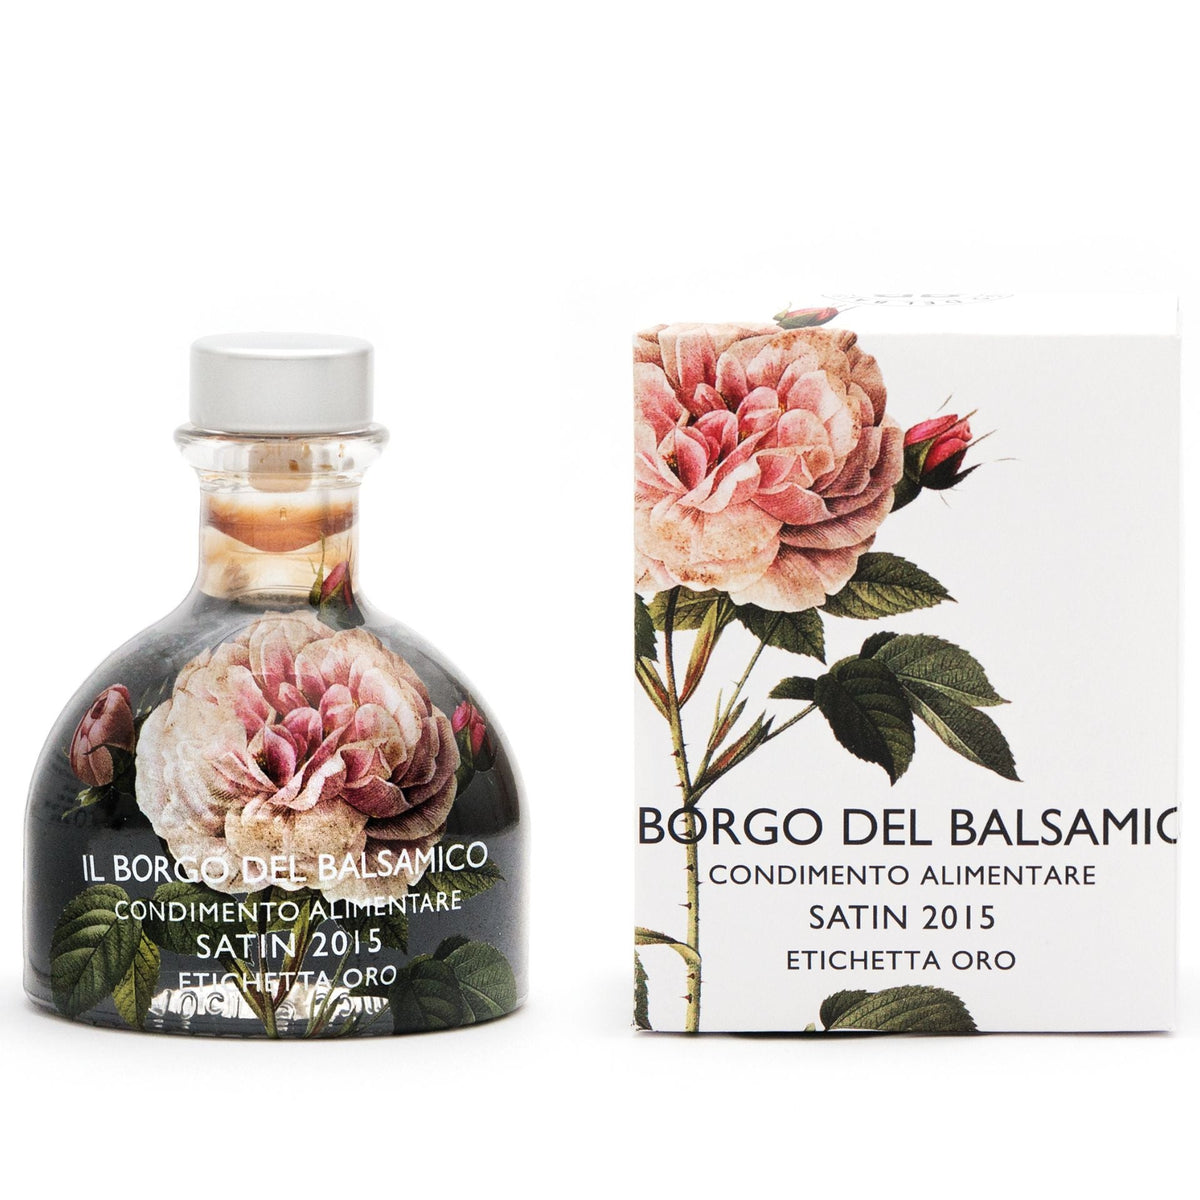 Il Borgo del Balsamico Aged Balsamic Satin Condiment - Rose Edition (Oval bottle with box) 100ml  | Imported and distributed in the UK by Just Gourmet Foods